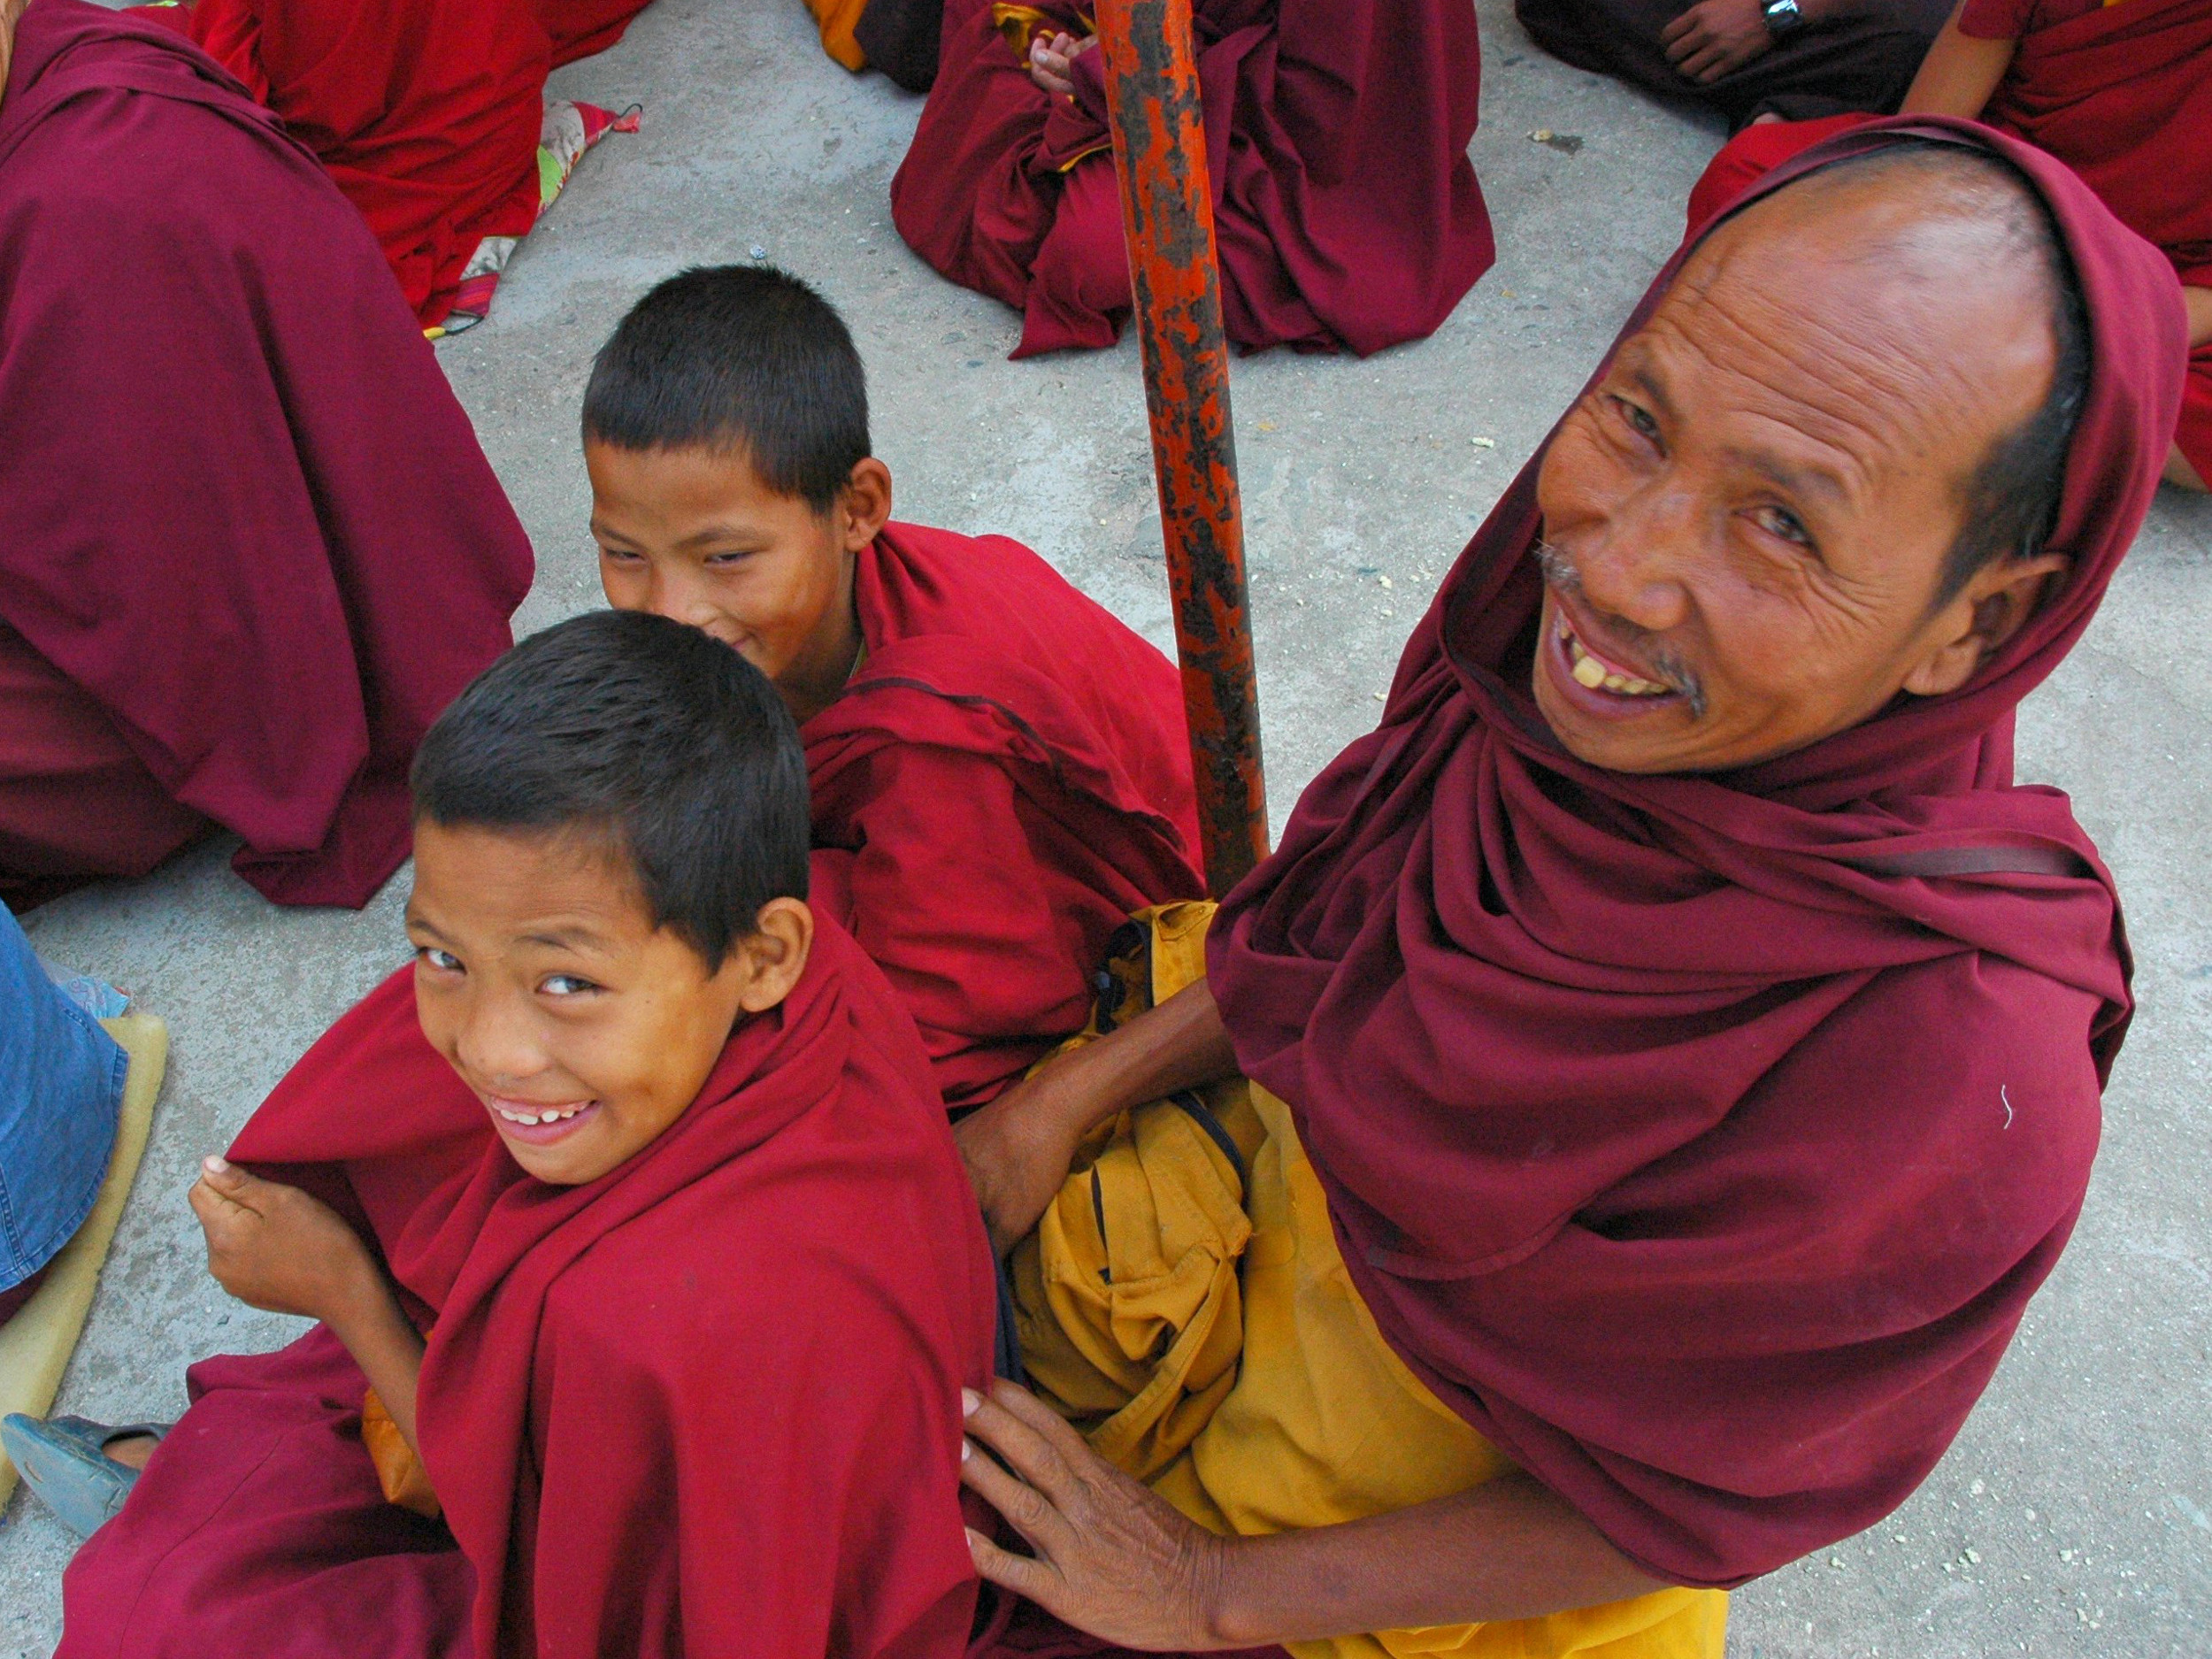 Monks and novices at Tharlam Gompa, Bodhnath. Image by Wonderlane / CC by 2.0